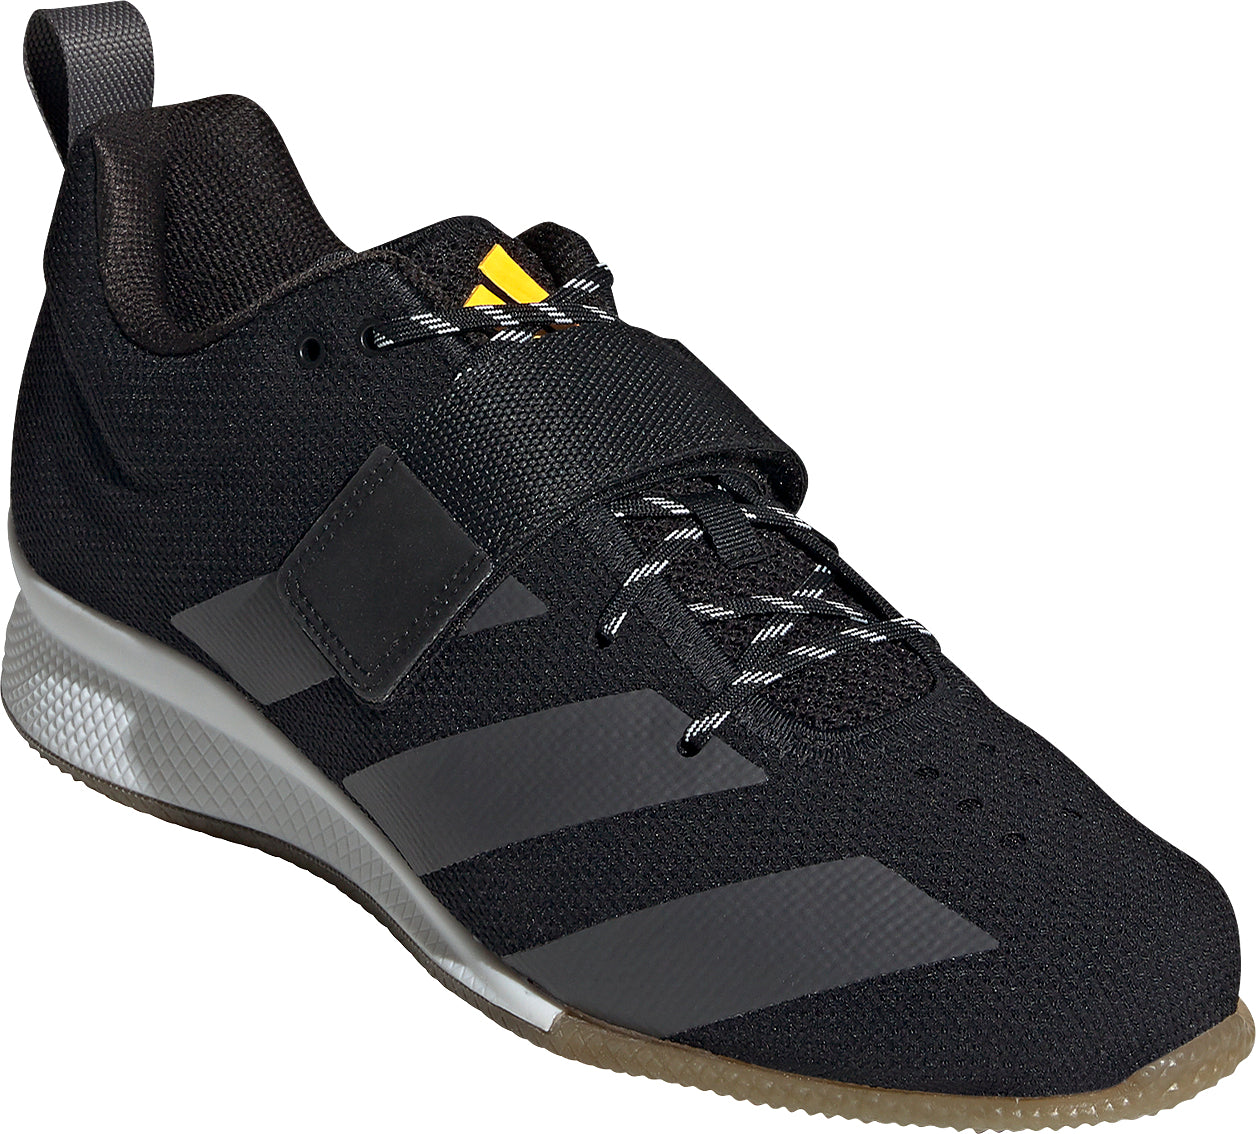 Adipower Shoes - Men's | Altitude Sports